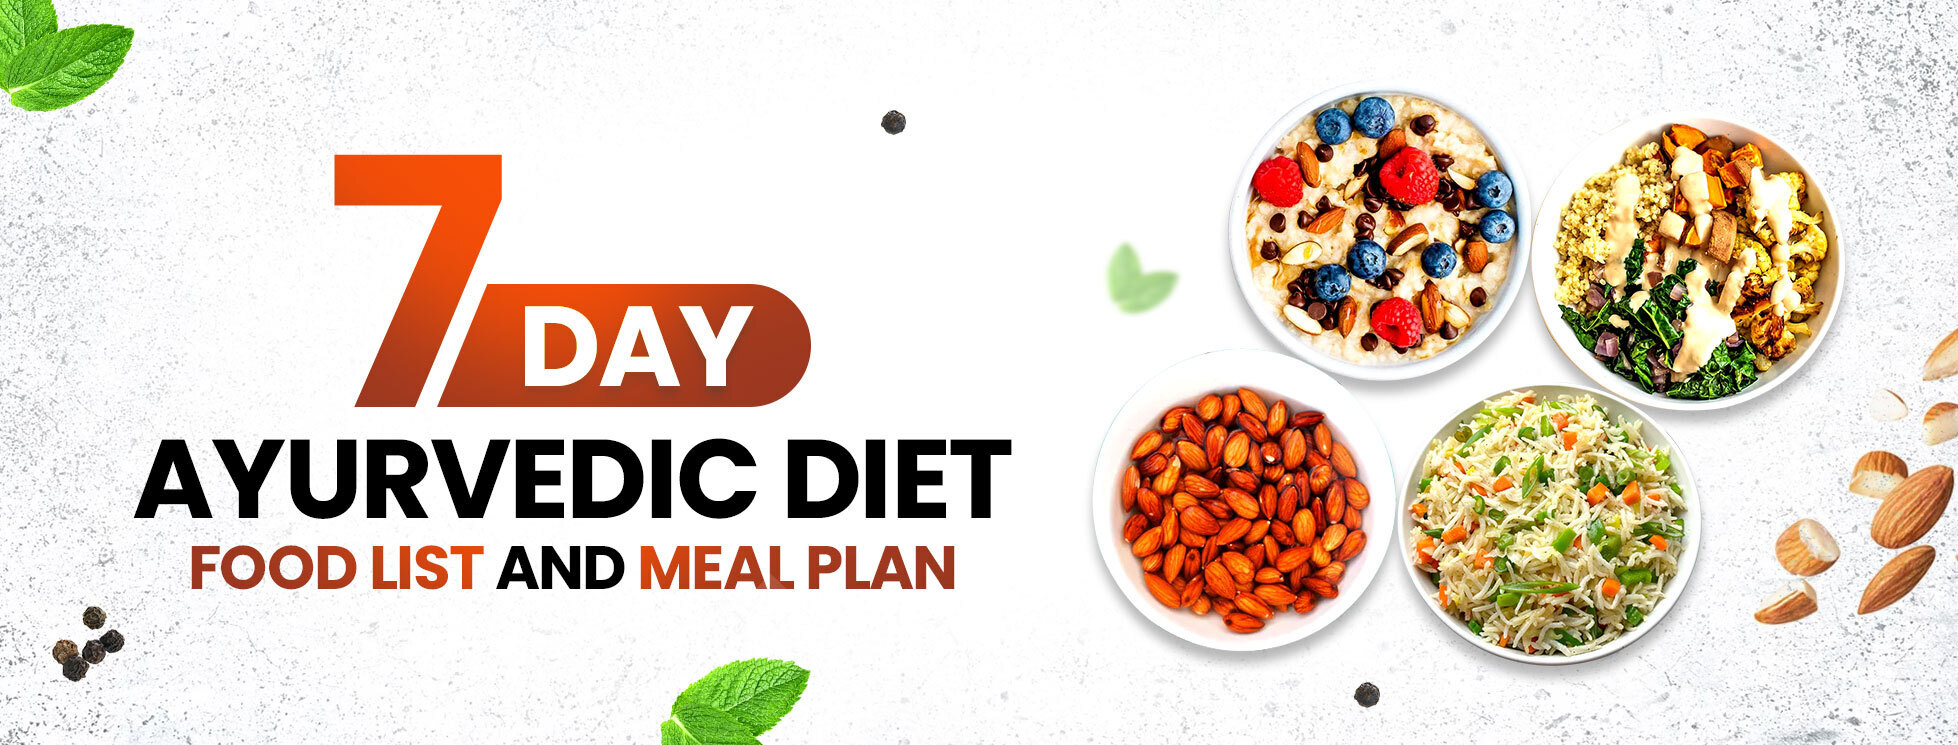 7-Day Ayurvedic Diet Food List and Meal Plan